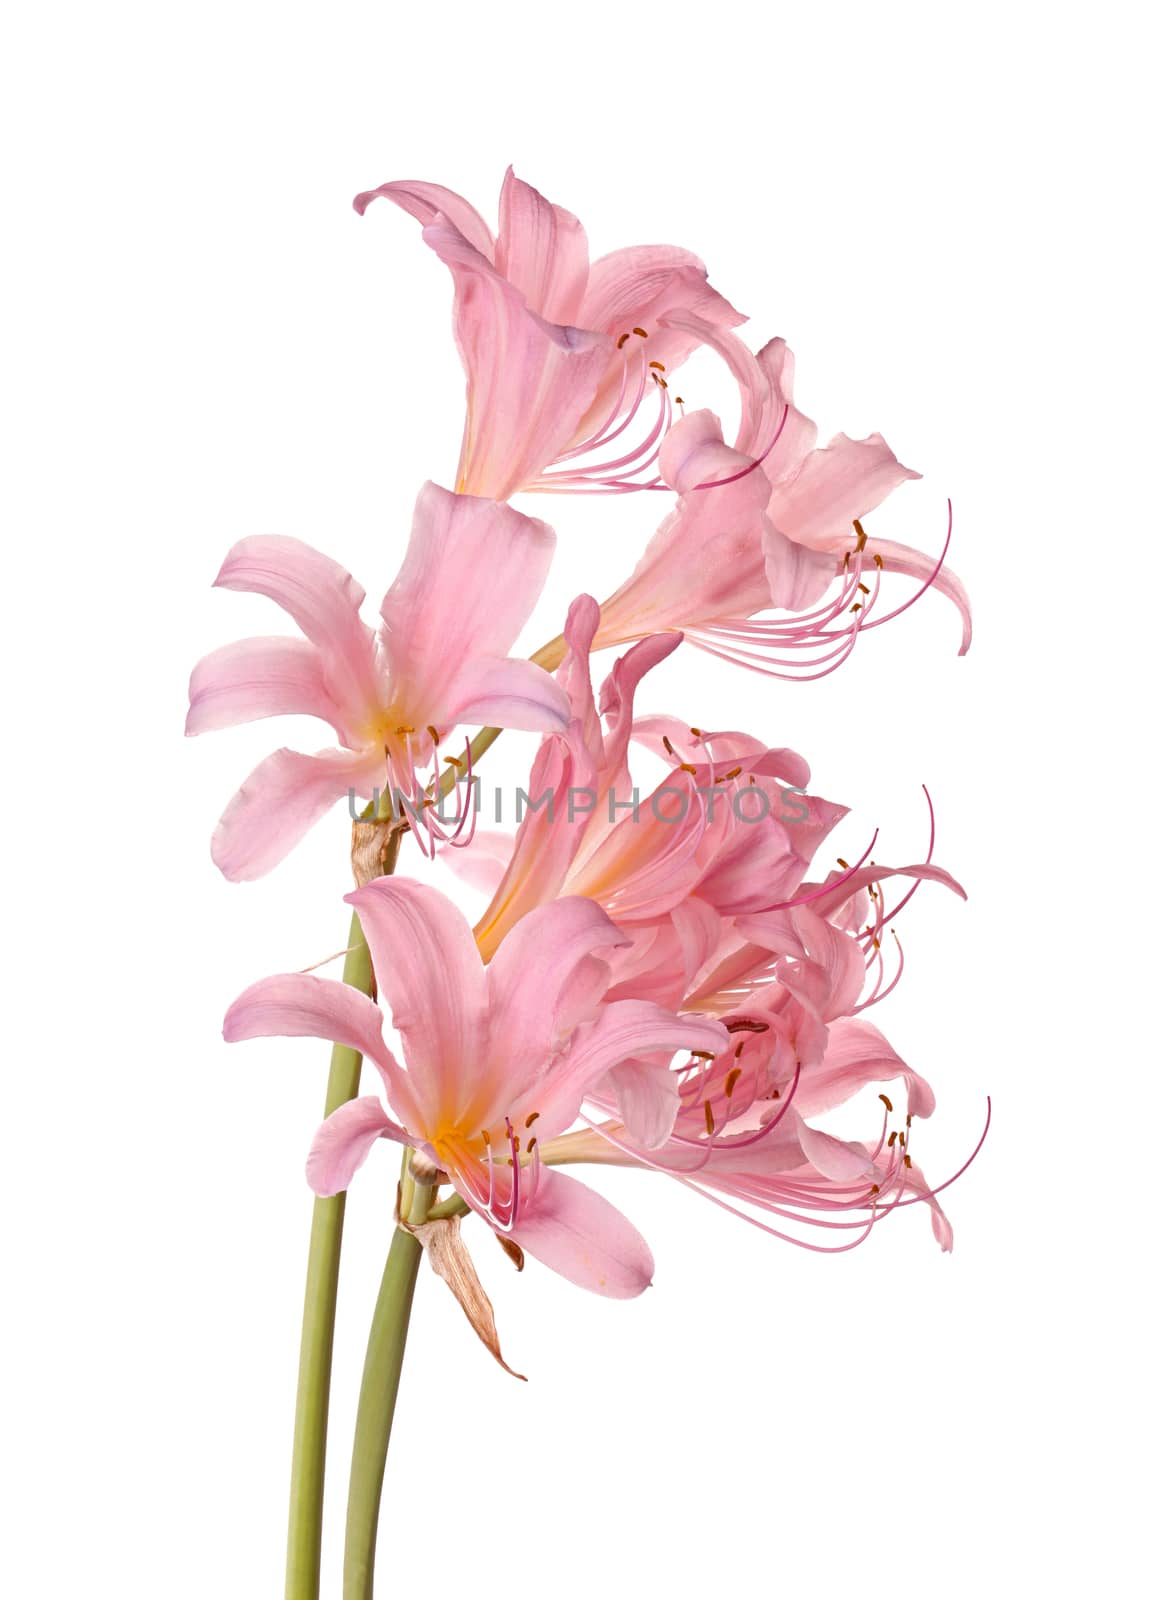 Pink flowers of Lycoris squamigera isolated against a white back by sgoodwin4813